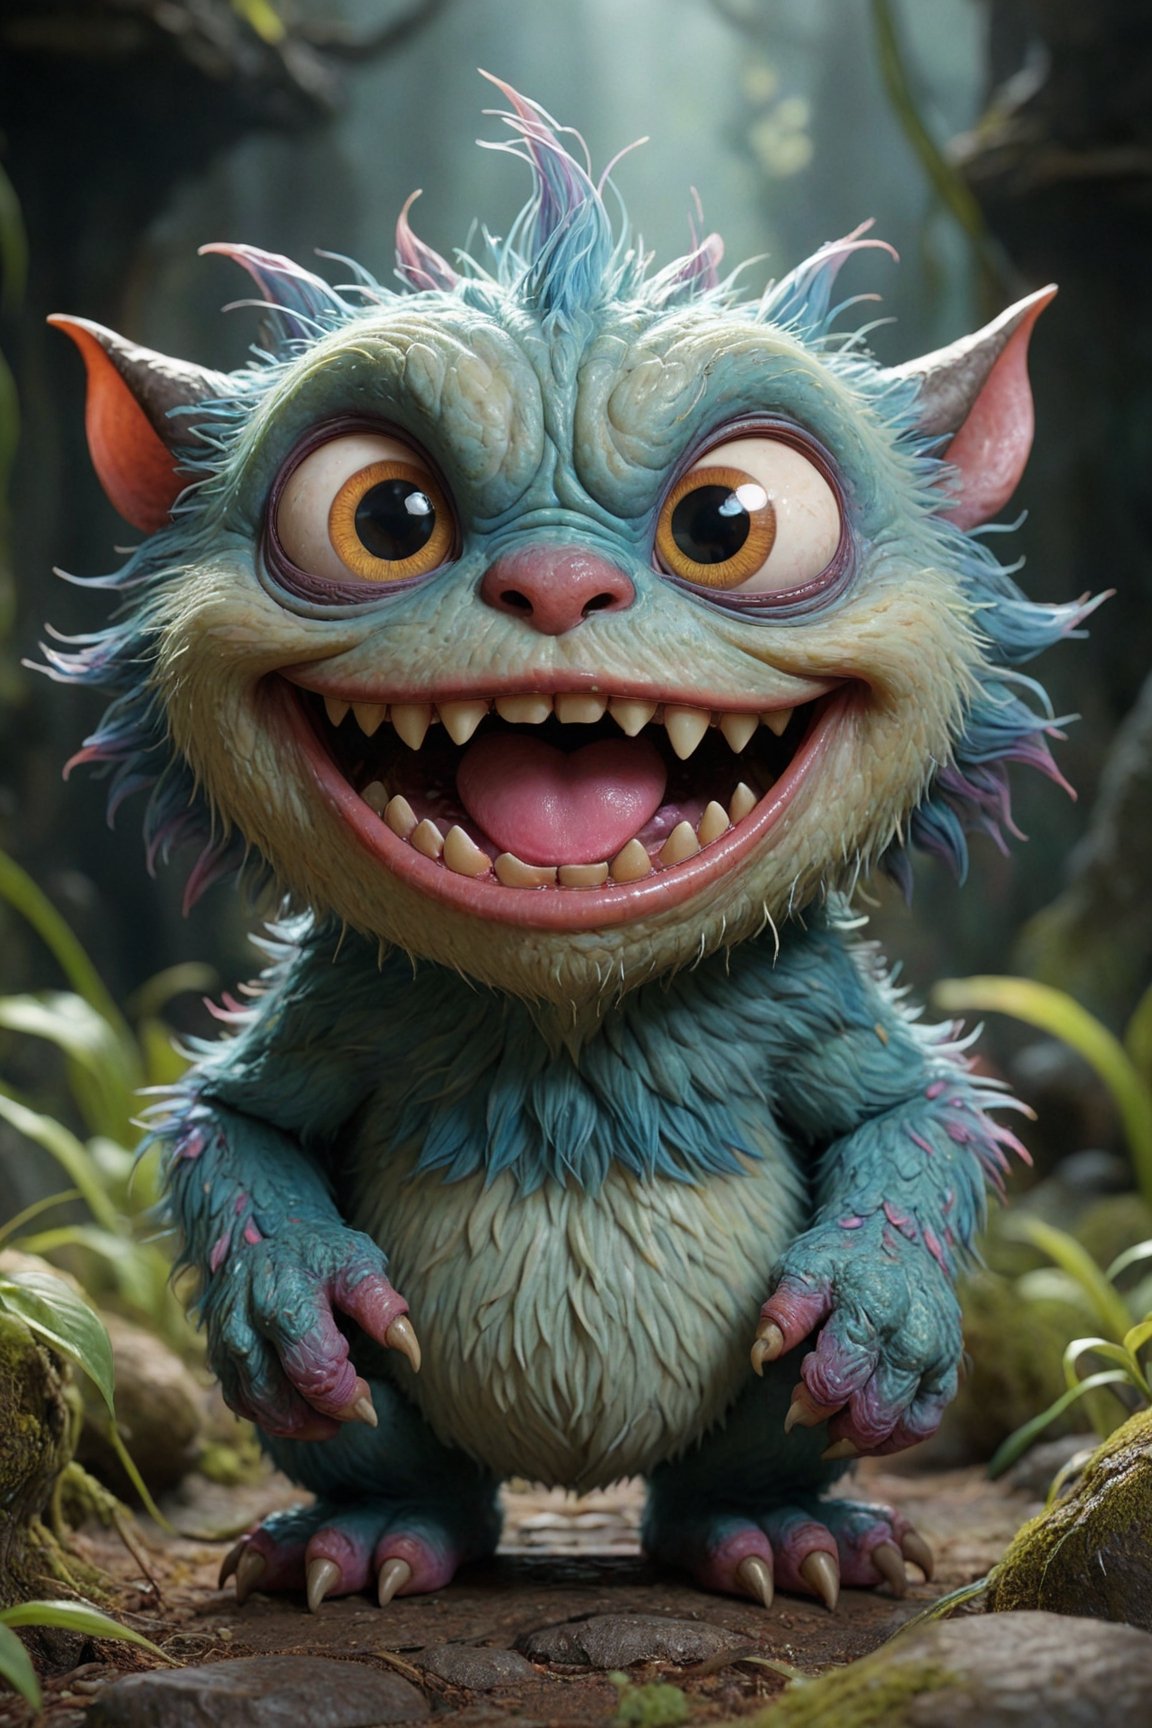 (best quality,8K,highres,masterpiece), ultra-detailed, 3D, capturing the whimsical essence of a cute, tiny monster with a distinctly creepy smile. This creature, while small in stature, boasts an array of vibrant colors and textures, making it stand out with its unique charm. Despite its eerie grin, there's an undeniable allure to its appearance, blending elements of the adorable with the slightly unsettling. The monster's eyes sparkle with mischief, suggesting a playful nature behind its unnerving smile. Its skin is highly textured, showcasing an array of soft, pastel shades that contrast with the darker, more mysterious tones of its grin. The background is deliberately blurred, focusing attention on the creature's expressive face and the intricate details that define its character. This portrayal combines the innocent with the eerie, inviting viewers into a world where even the smallest monsters carry a mix of cuteness and mystery.